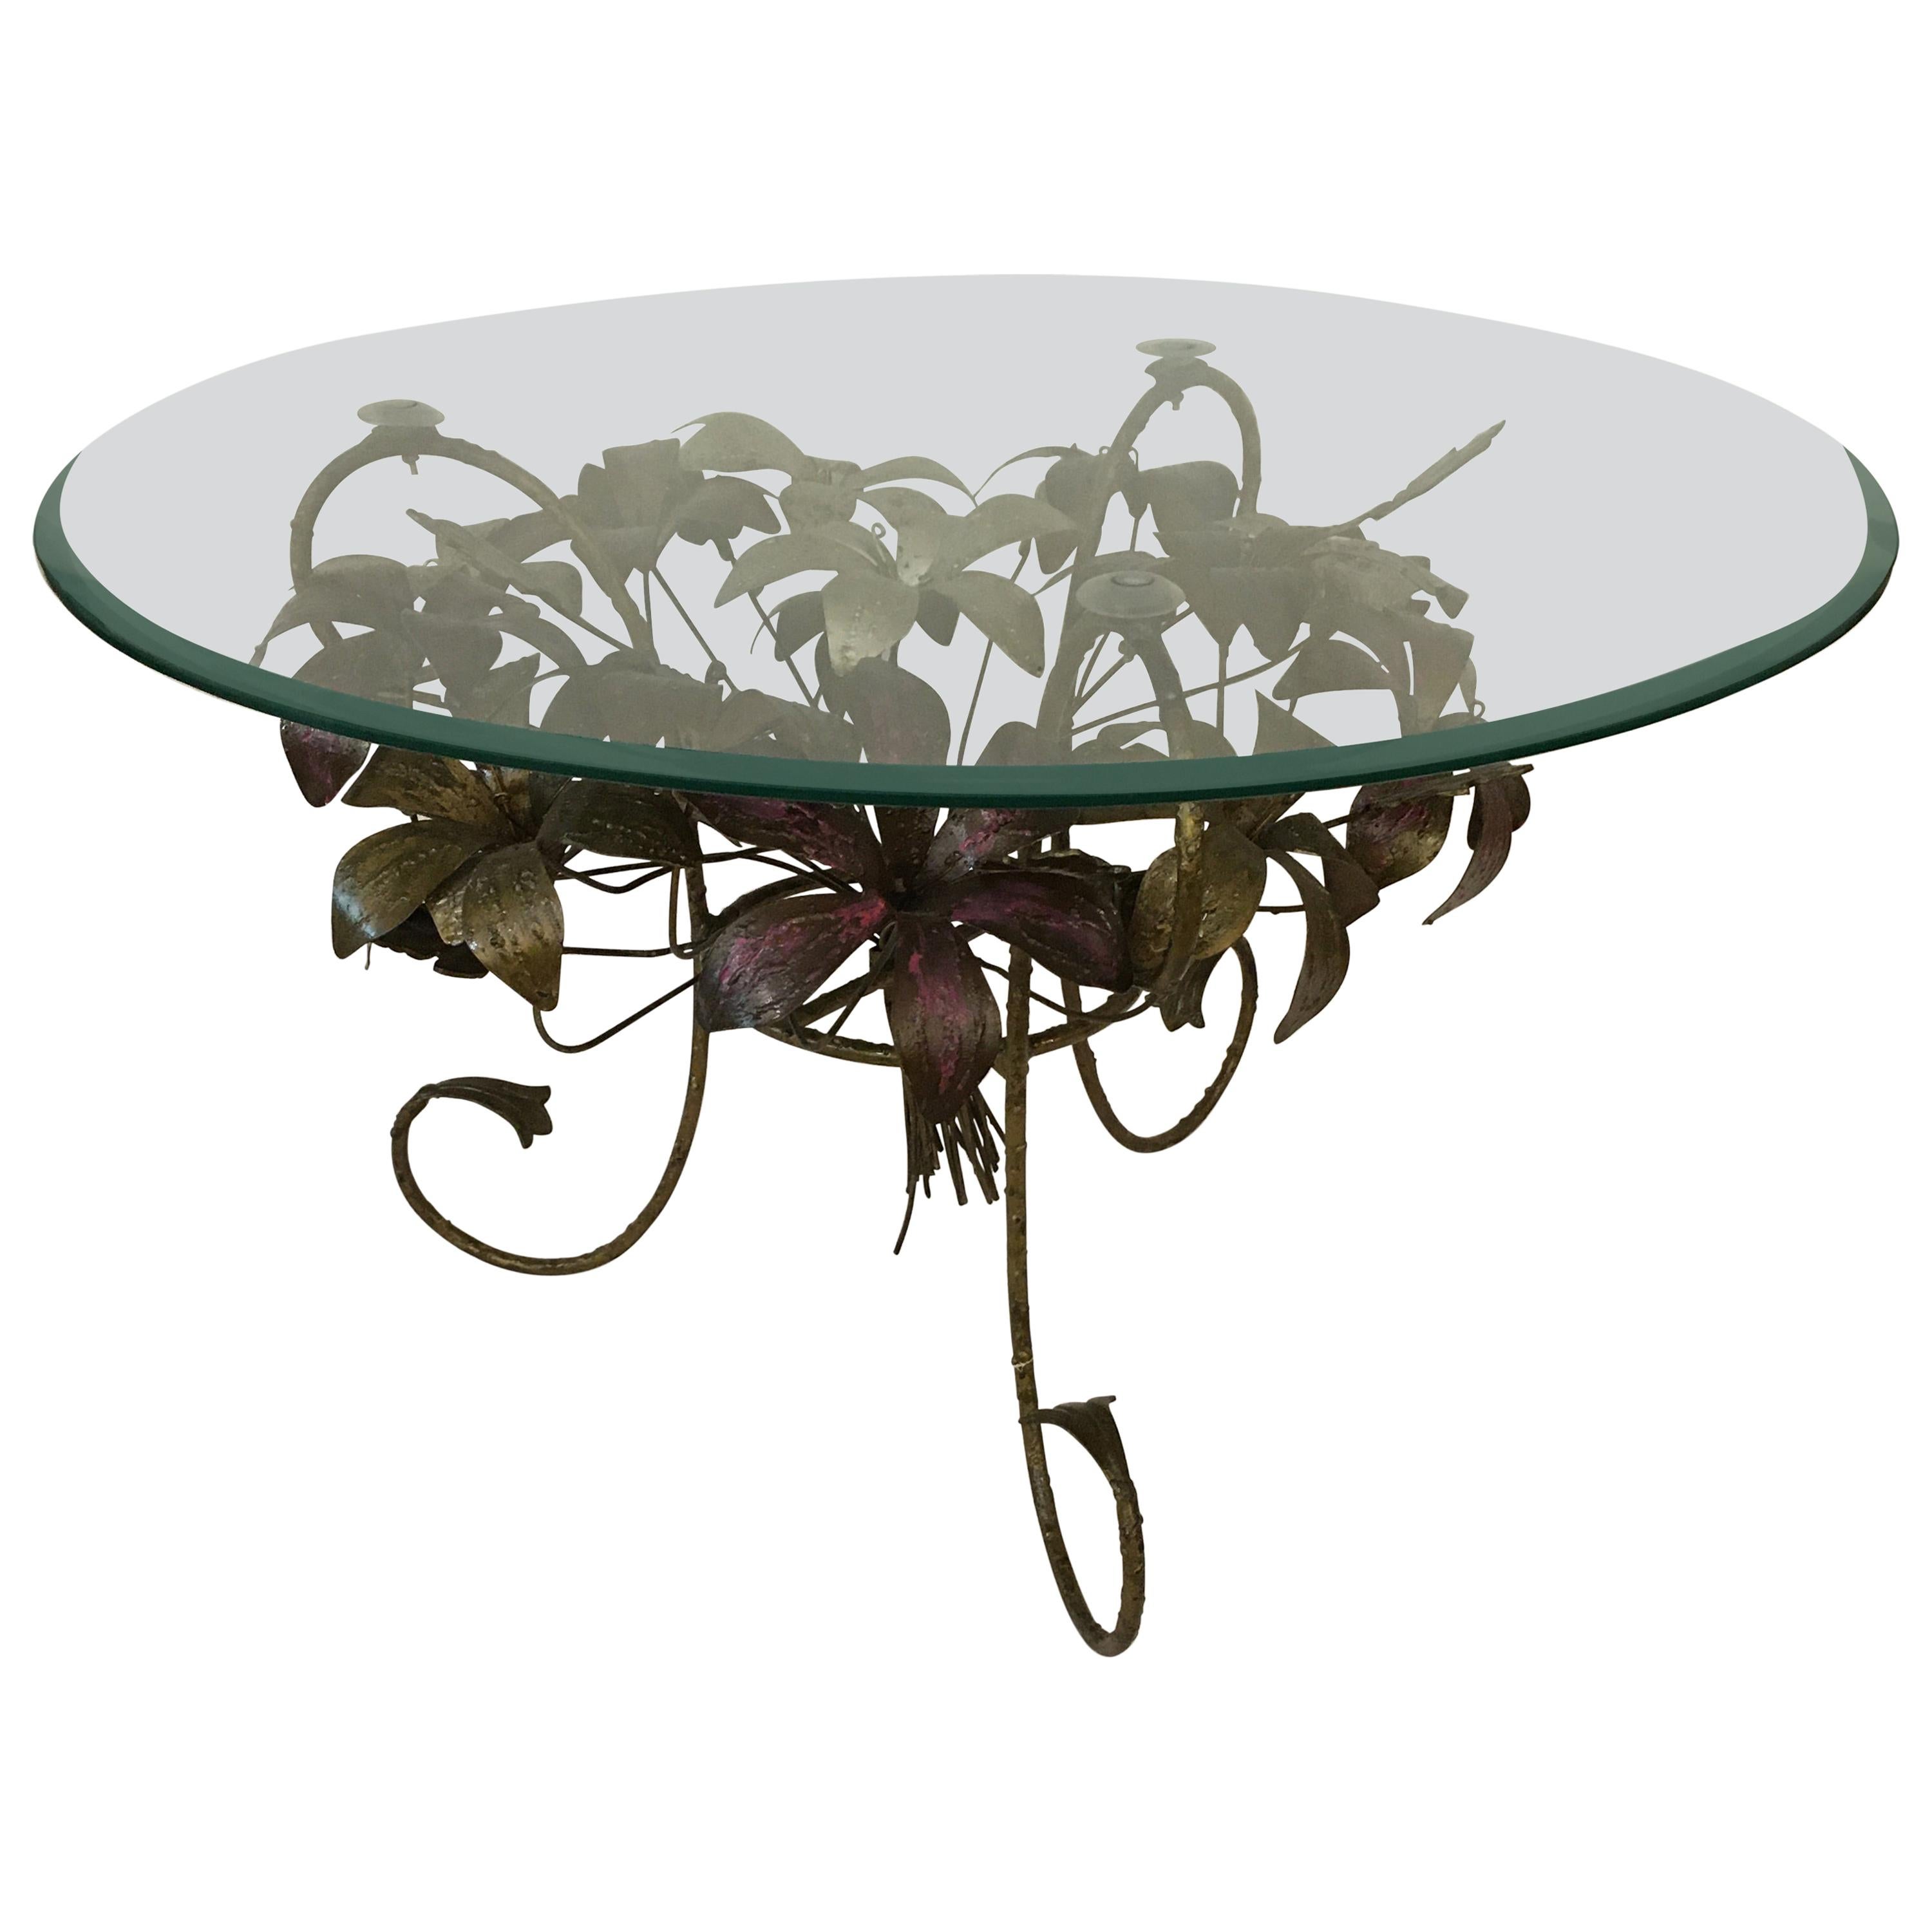 Painted Metal Flower Petal Coffee Table with Beveled Glass Top, 1960s